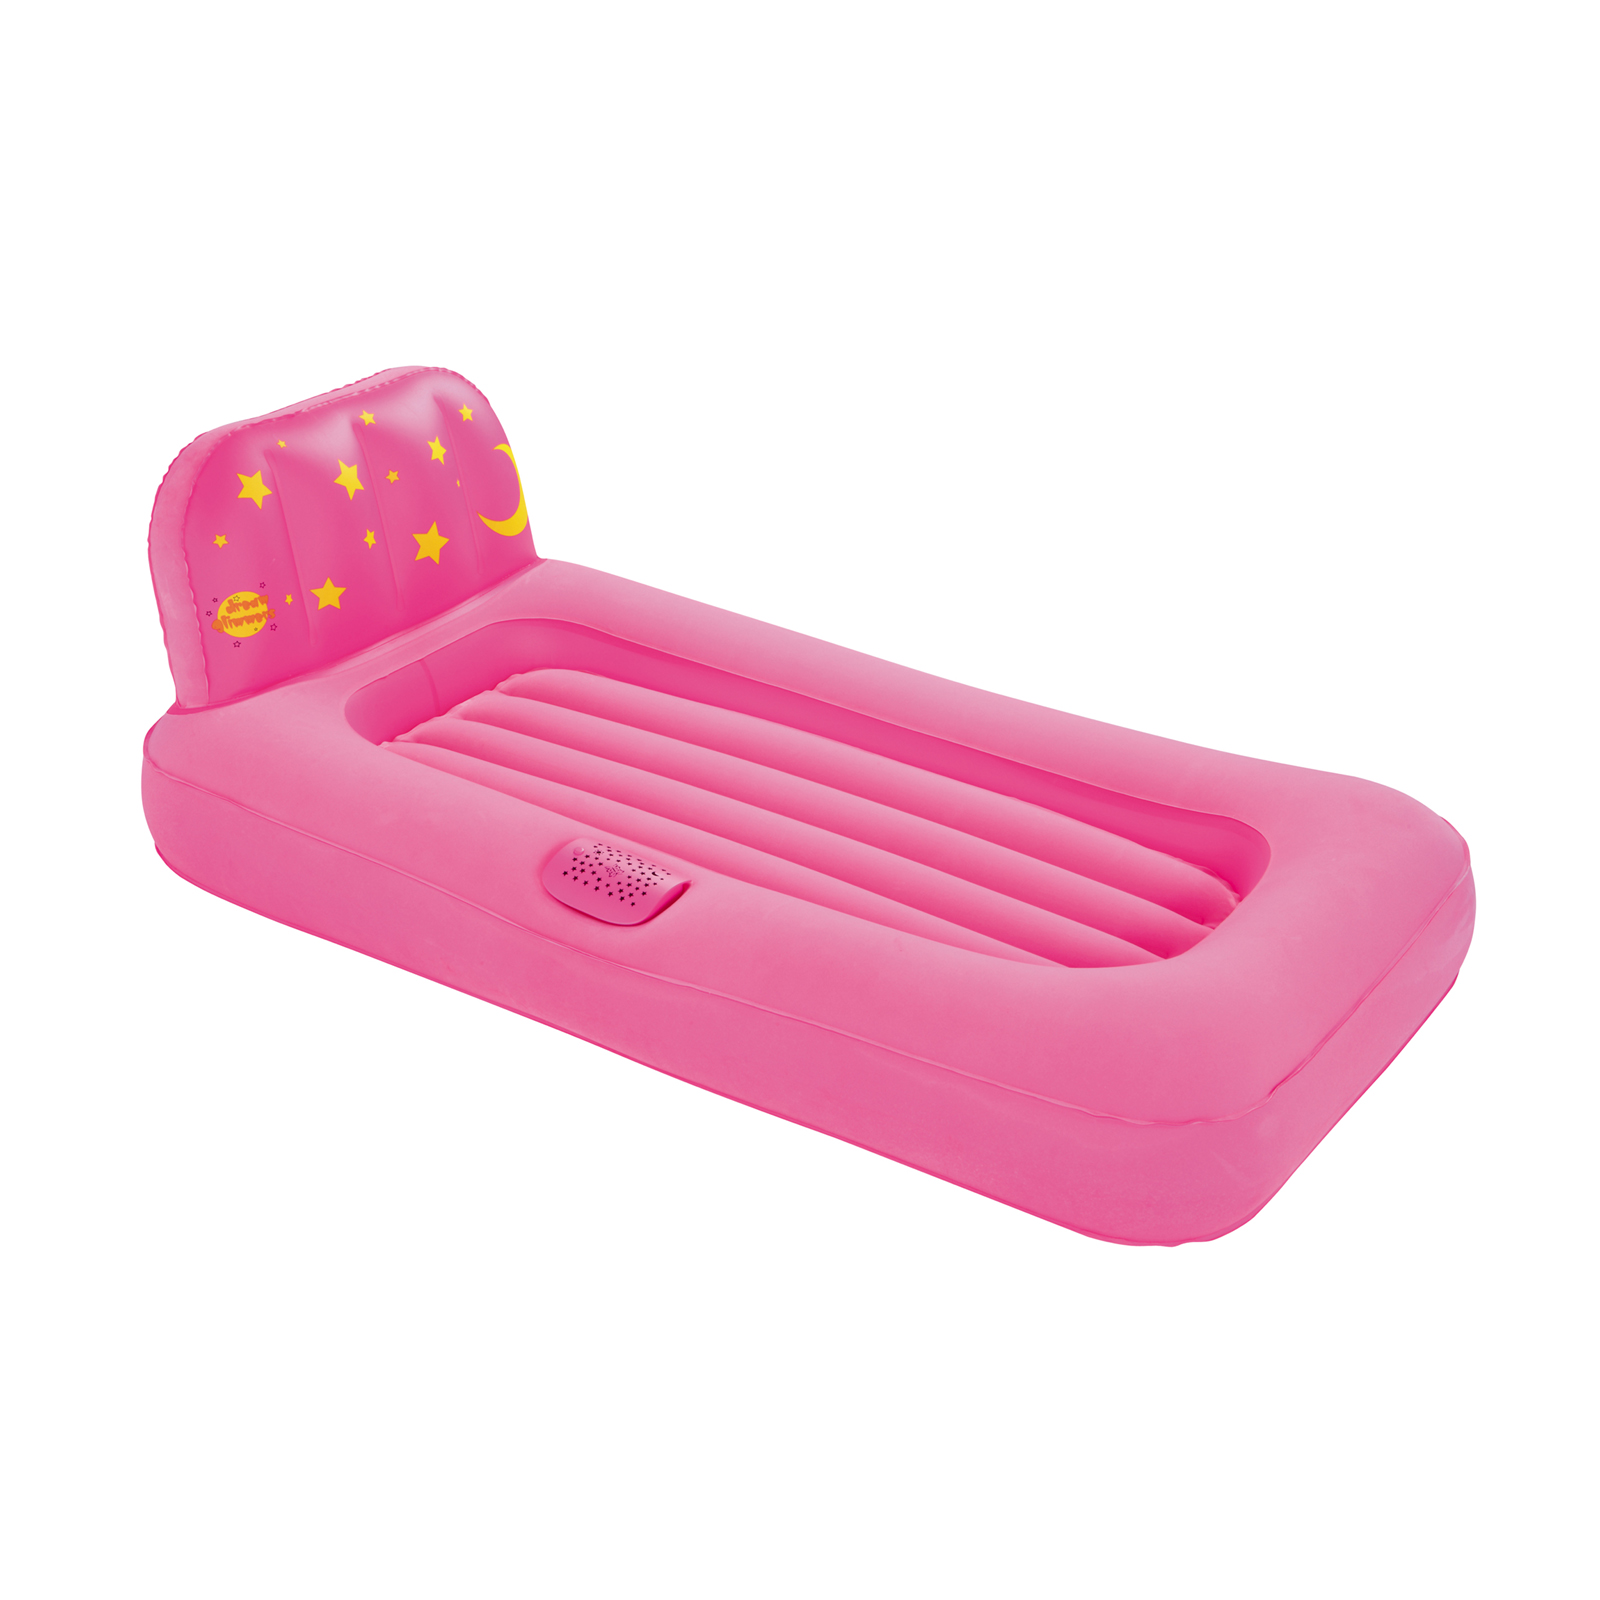 UPC 821808100736 product image for Bestway Dream Glimmers Pink Comfort Airbed | upcitemdb.com